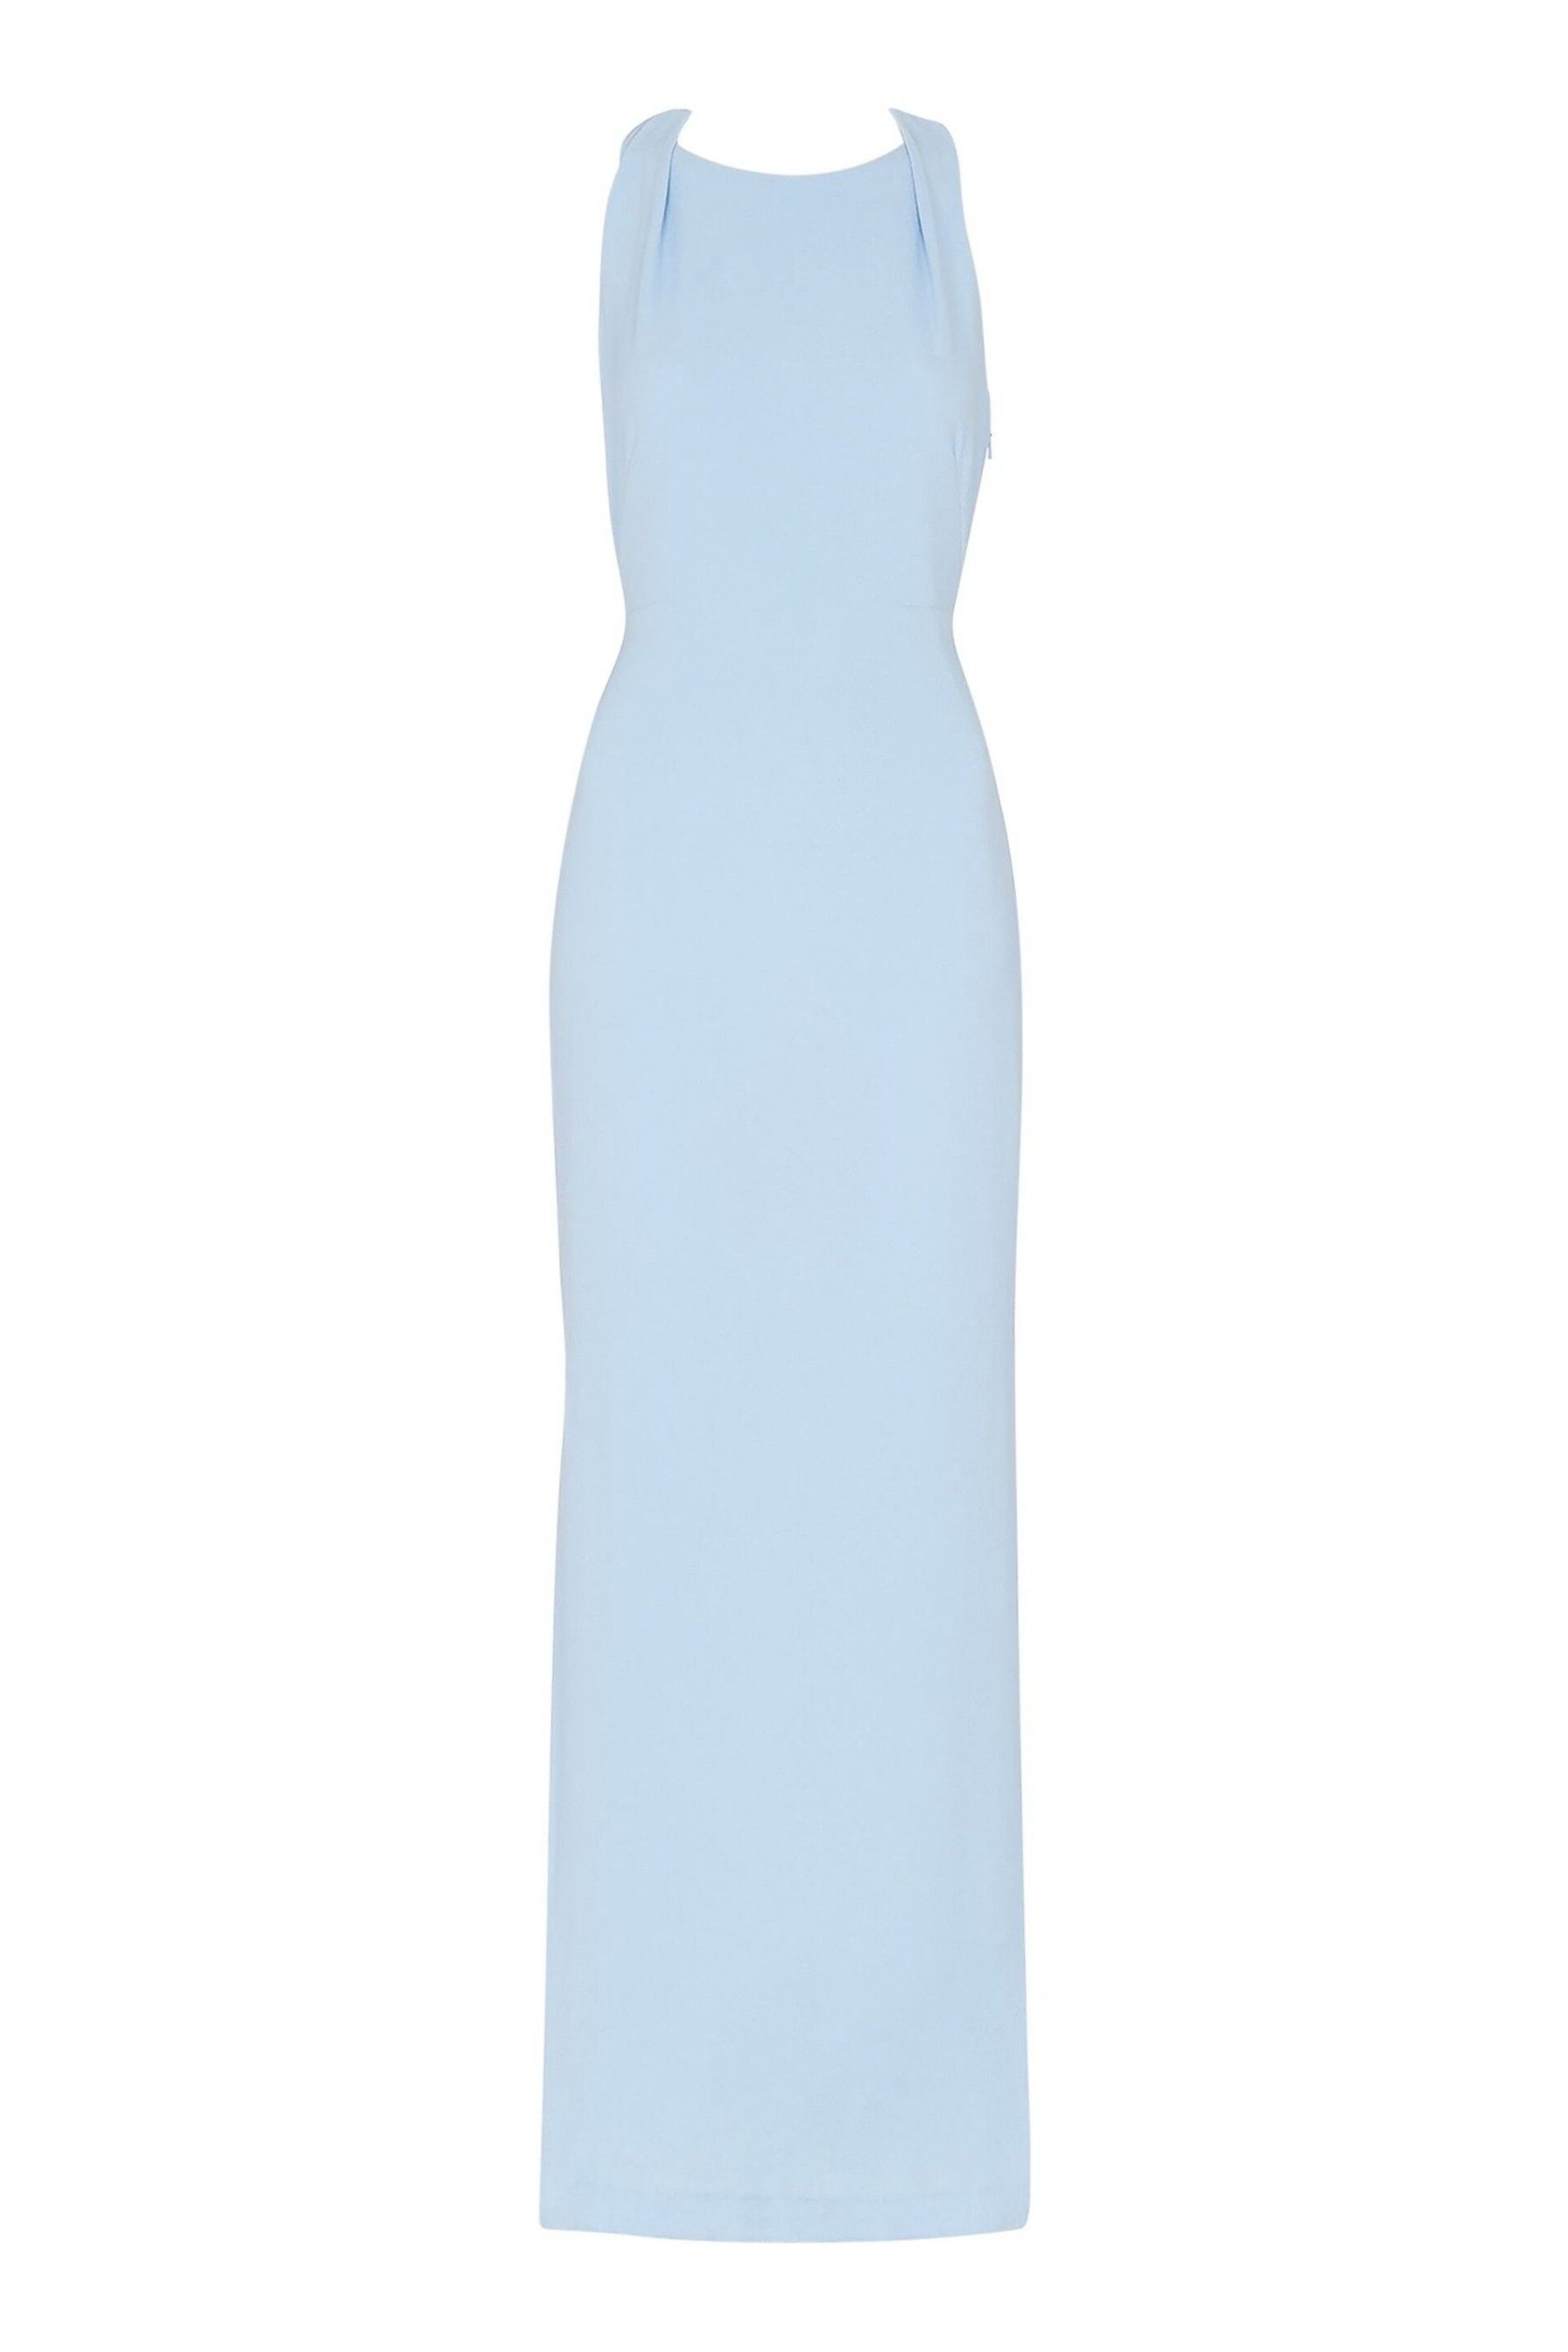 Whistles Blue Tie Back Maxi Dress - Image 3 of 3